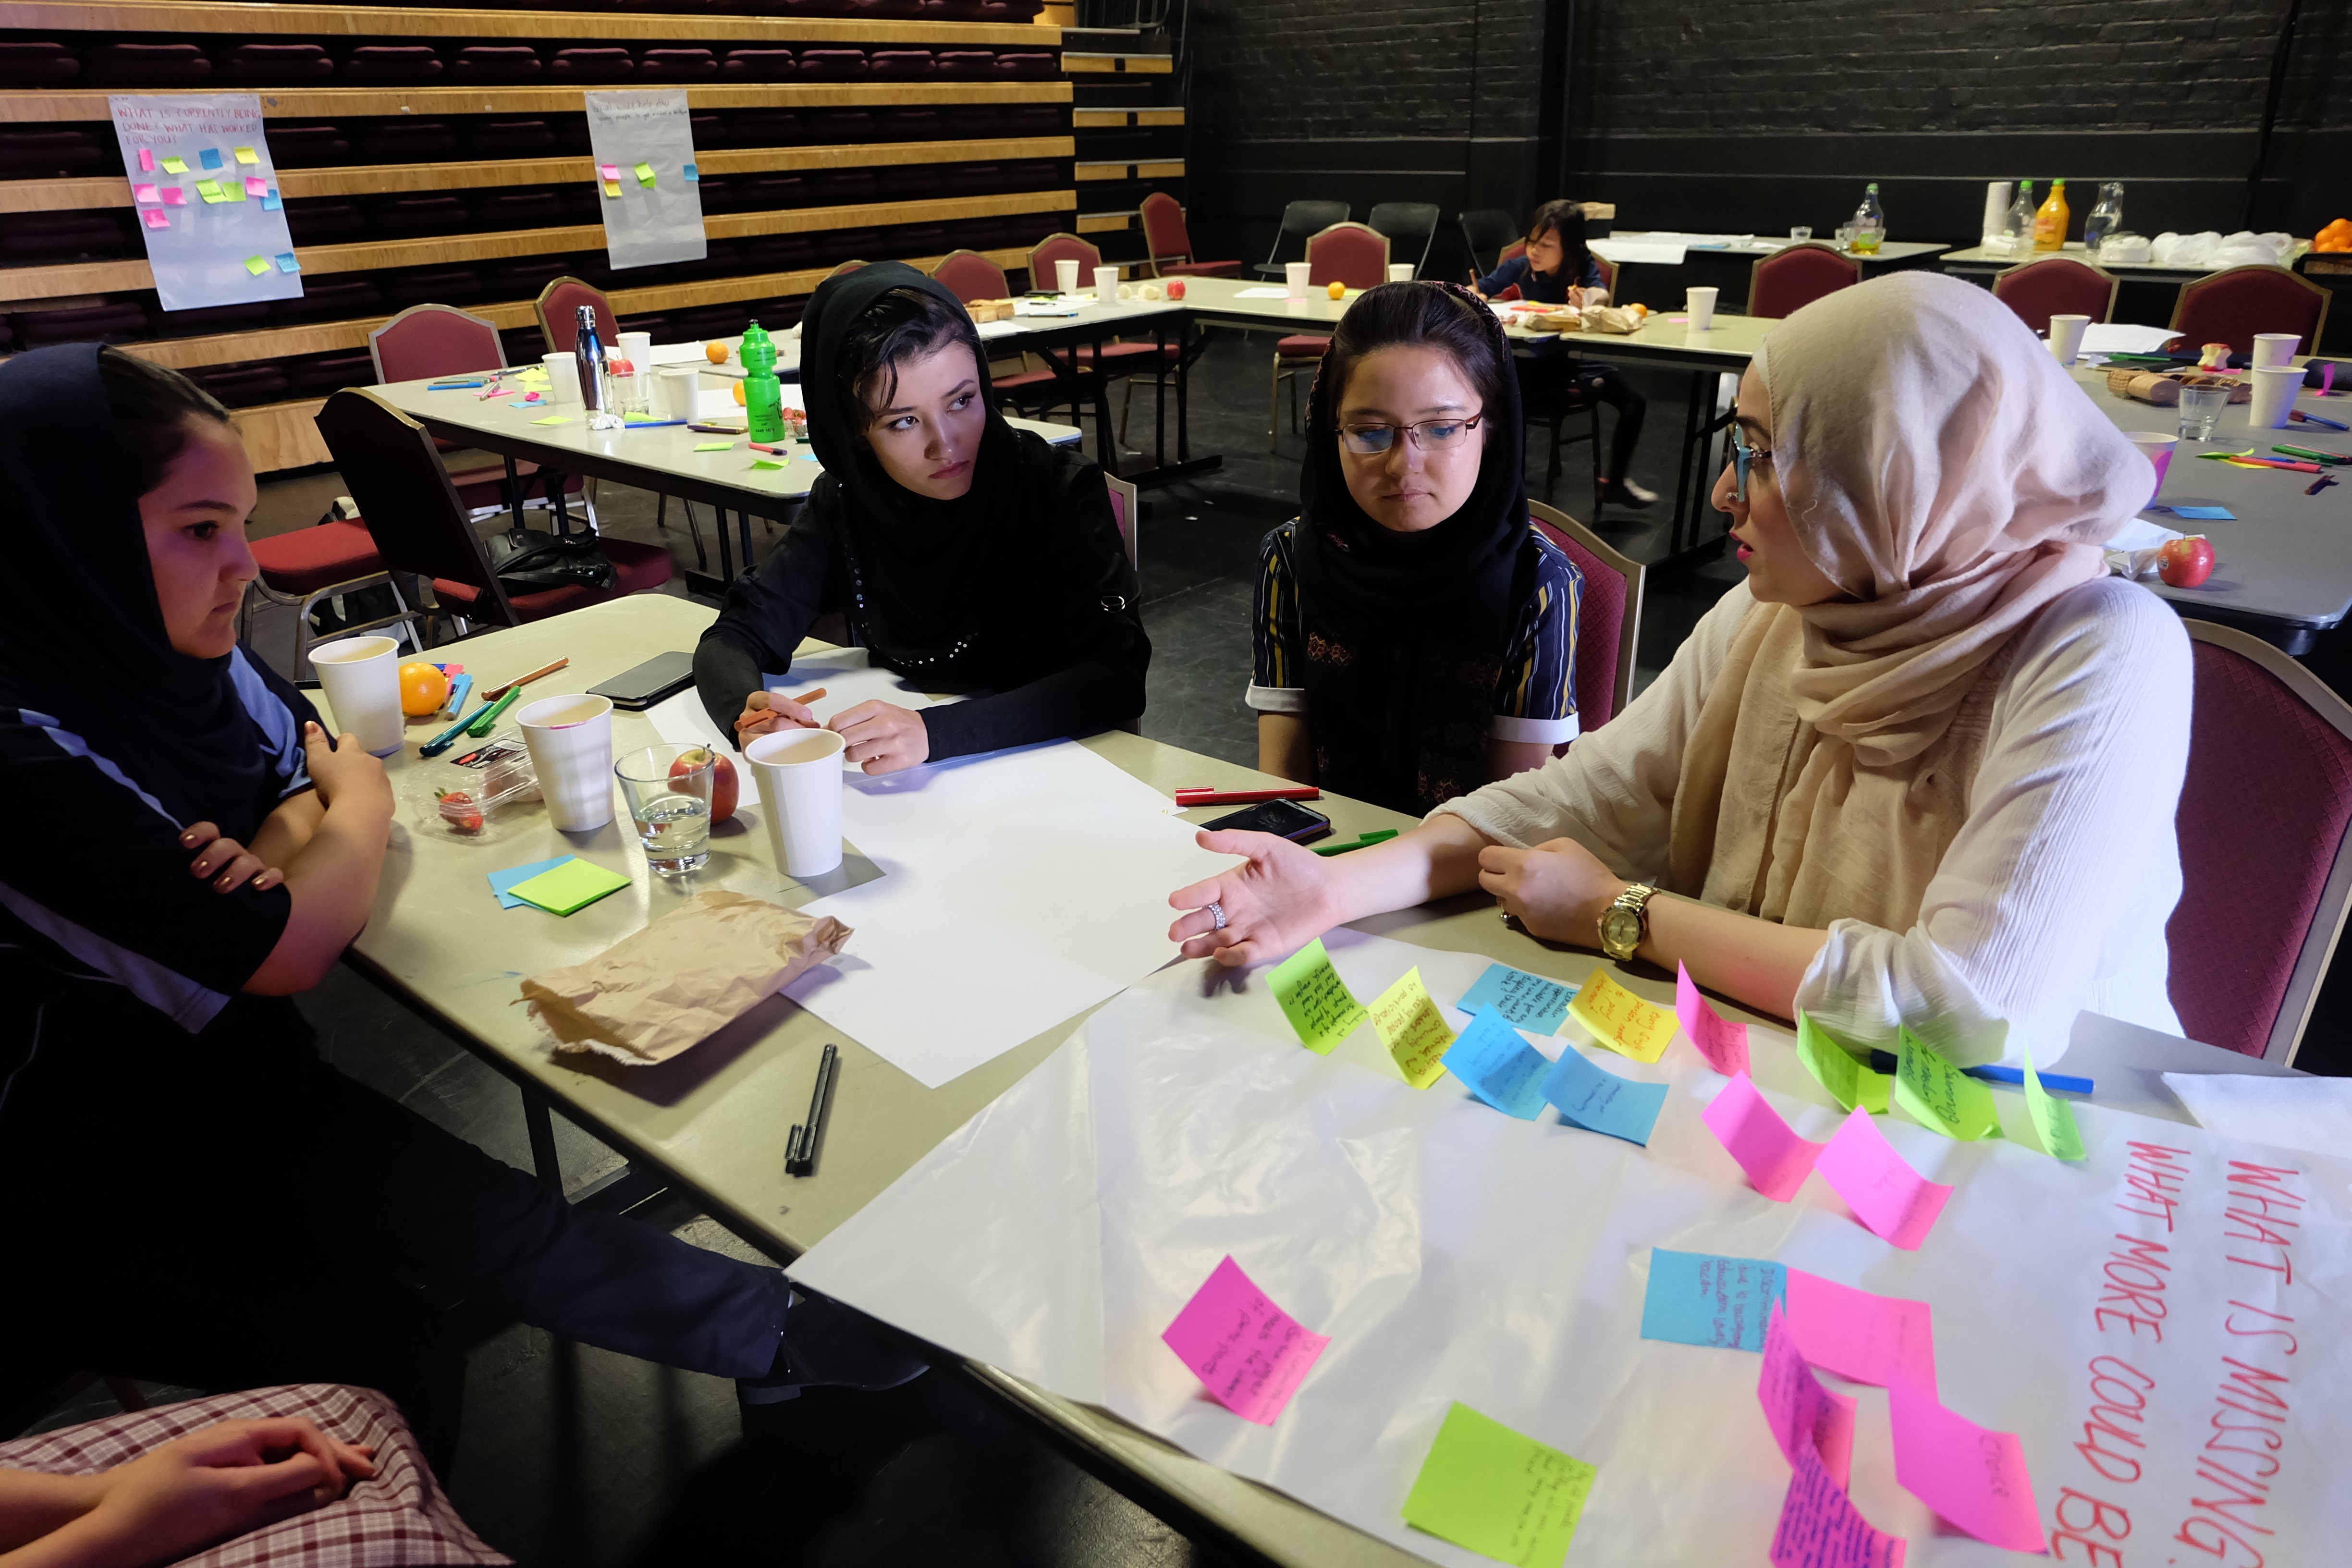 Workshop participants develop guidance for organisations and artists.  